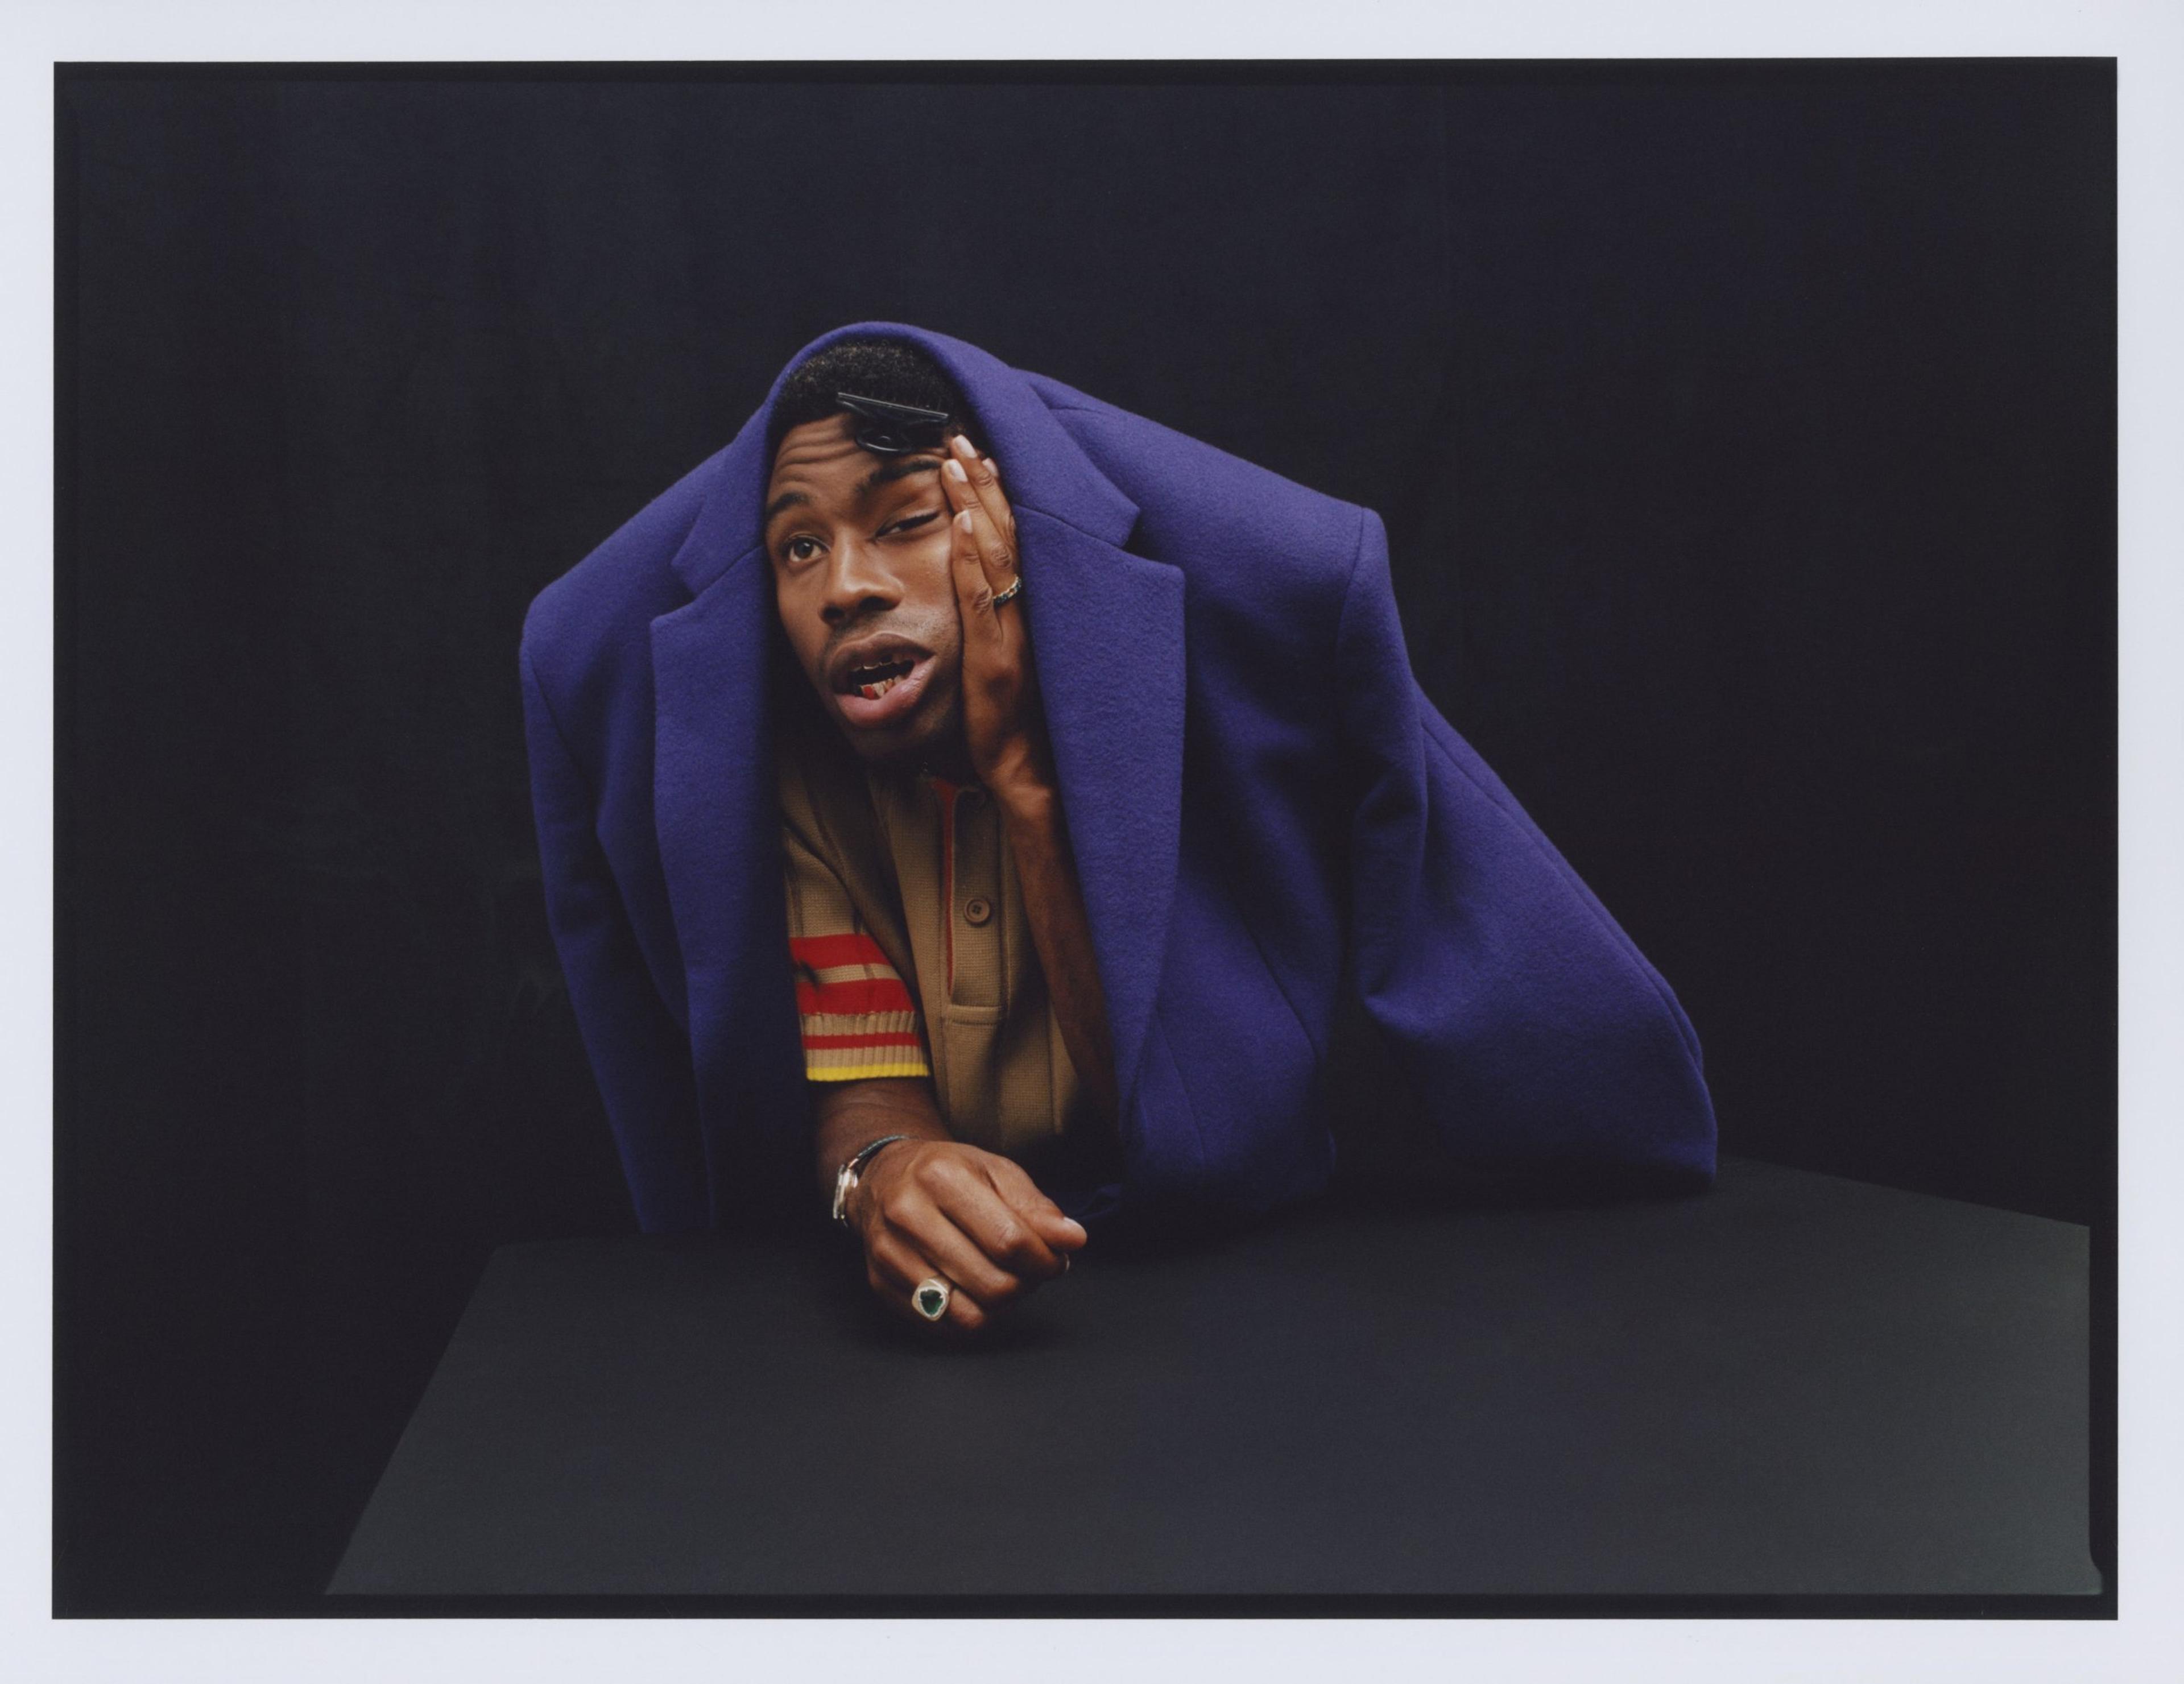 A photograph of Tyler, The Creator with a purple blazer draped on his head and holding his hand to his eye